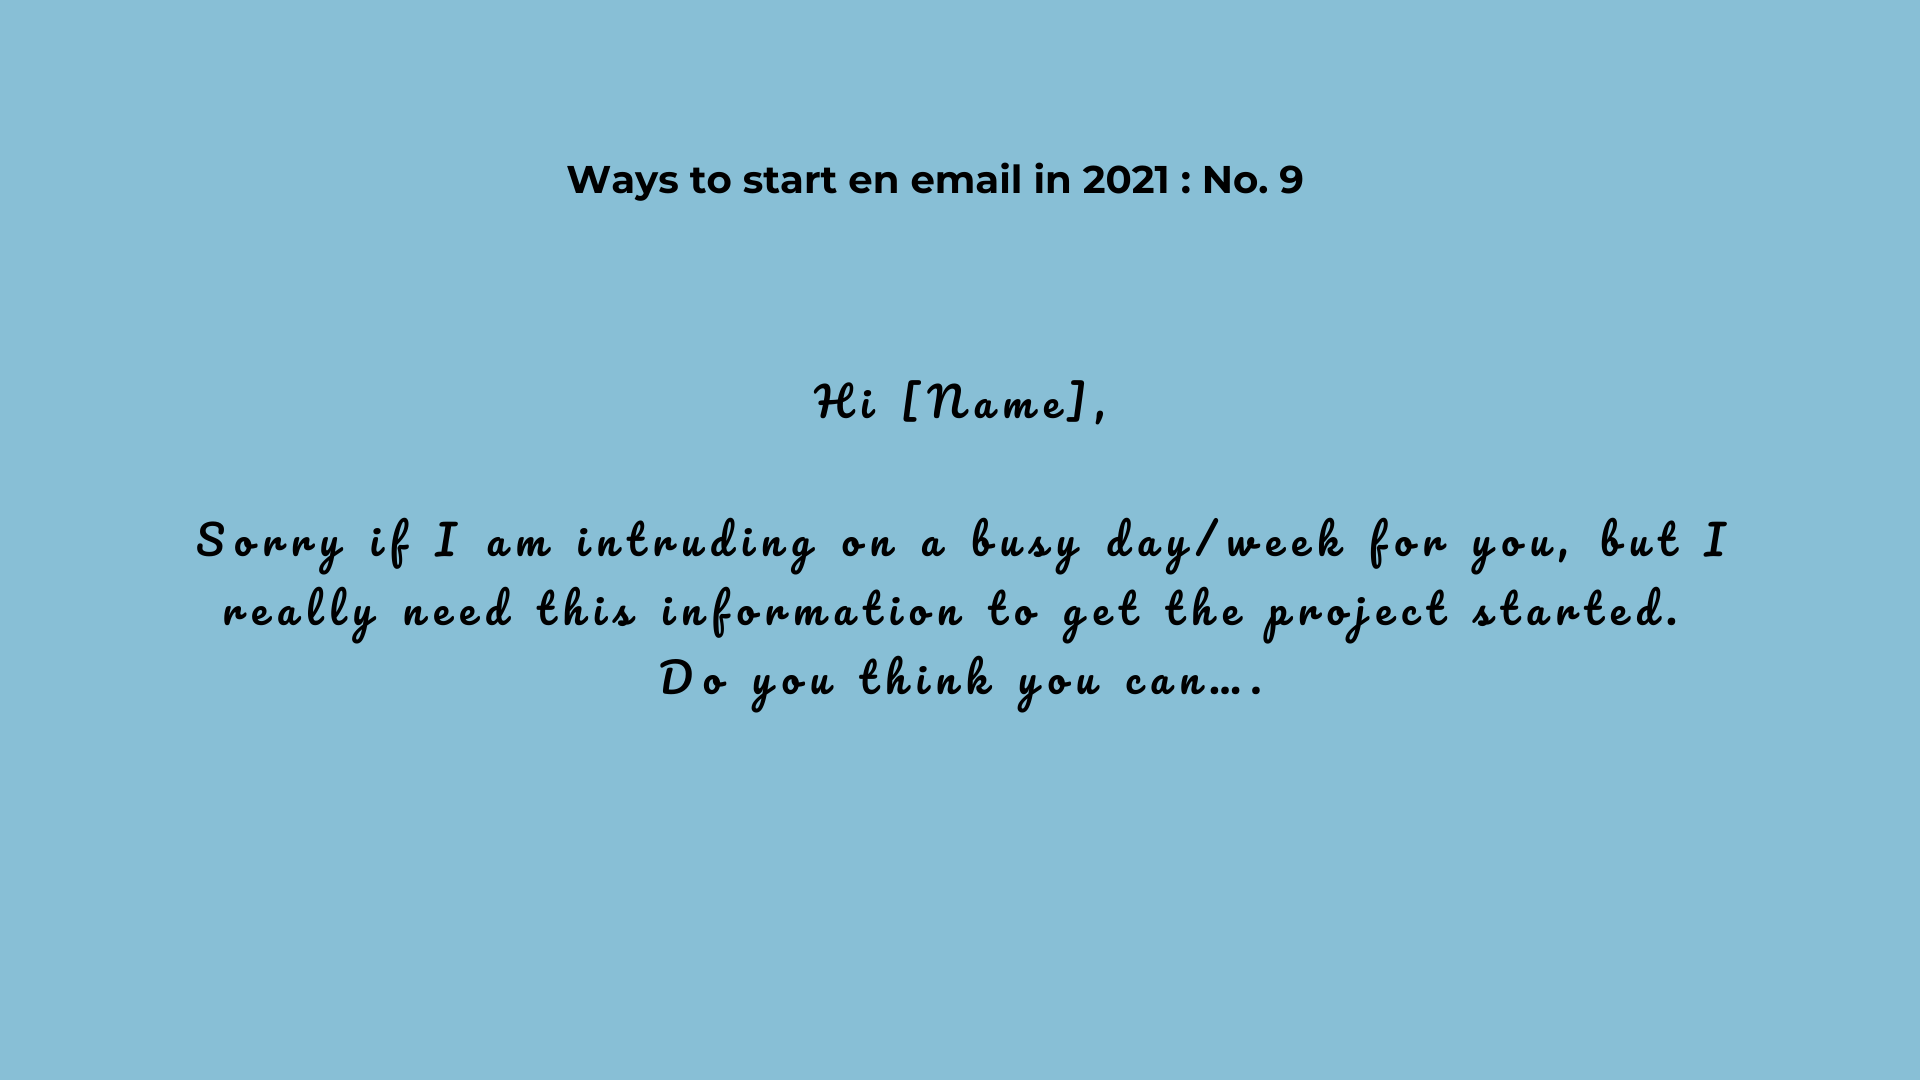 19-ways-to-start-an email-way9